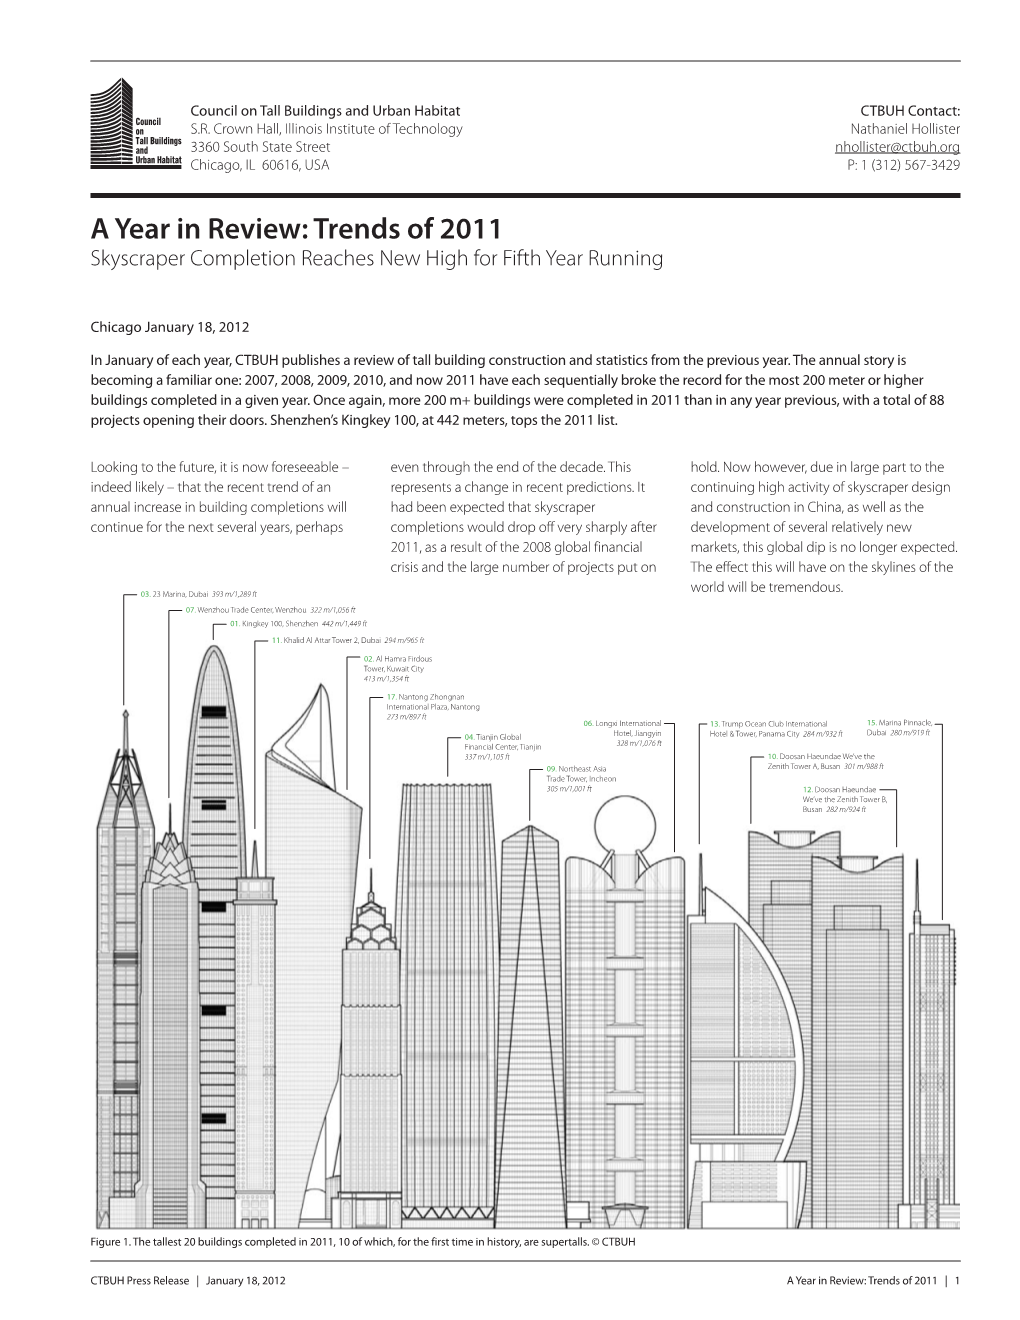 A Year in Review: Trends of 2011 Skyscraper Completion Reaches New High for Fifth Year Running